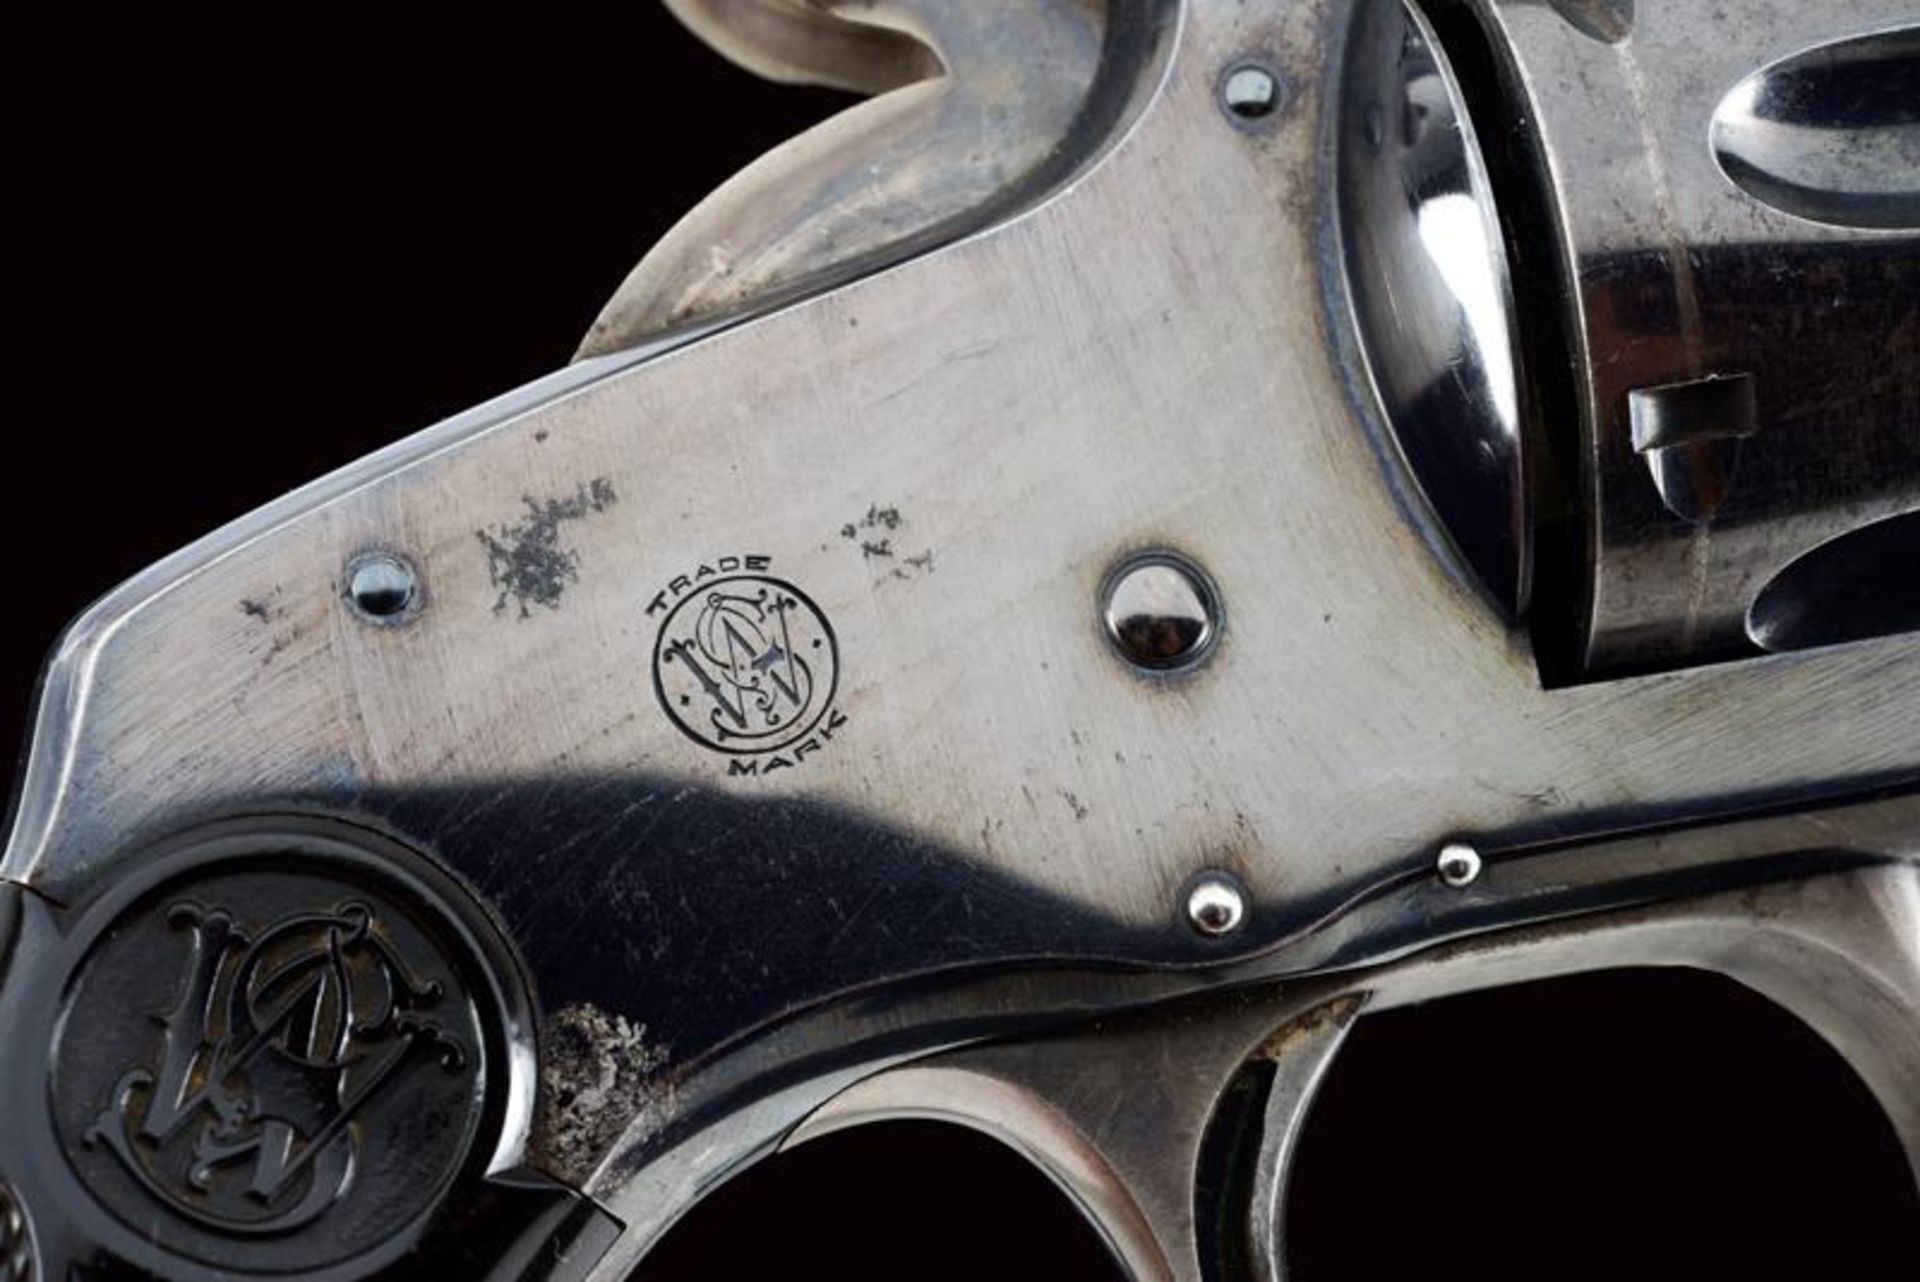 S&W New Model No. 3 Single Action Revolver - Image 2 of 8